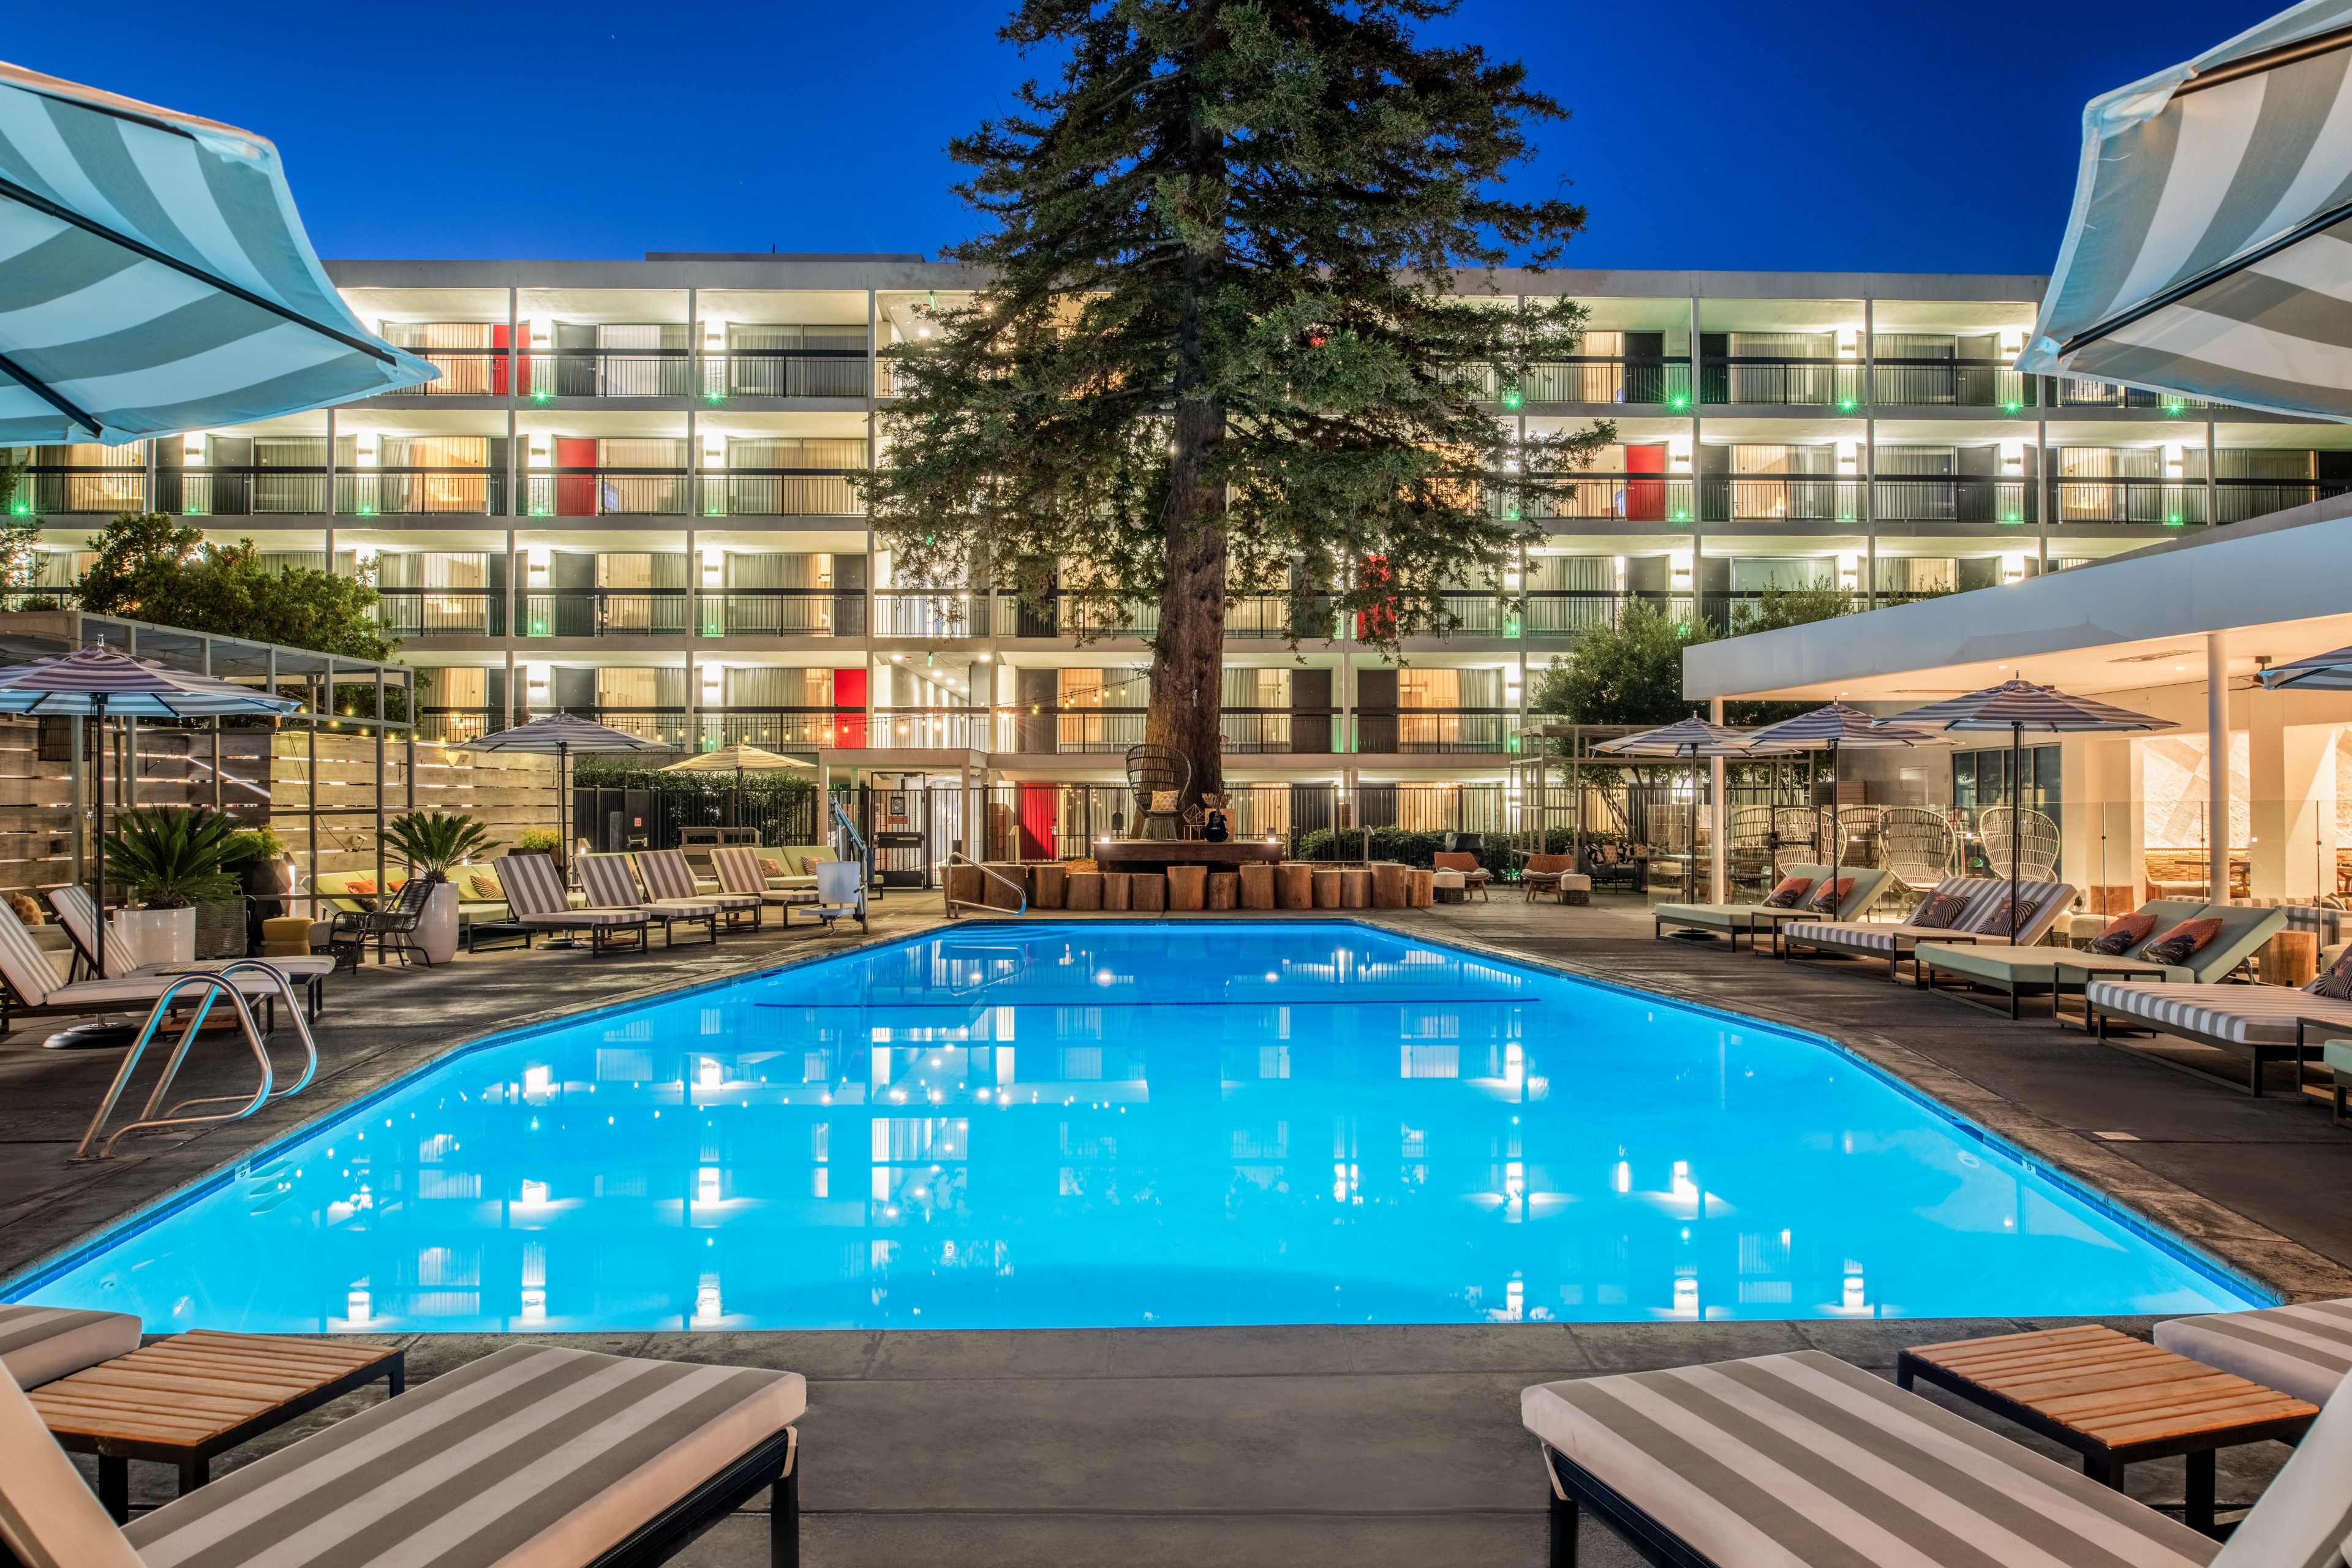 The image depicts a night scene of a brightly lit pool area surrounded by lounge chairs, cabanas, and a multi-story building with balconies, centered by a large tree.